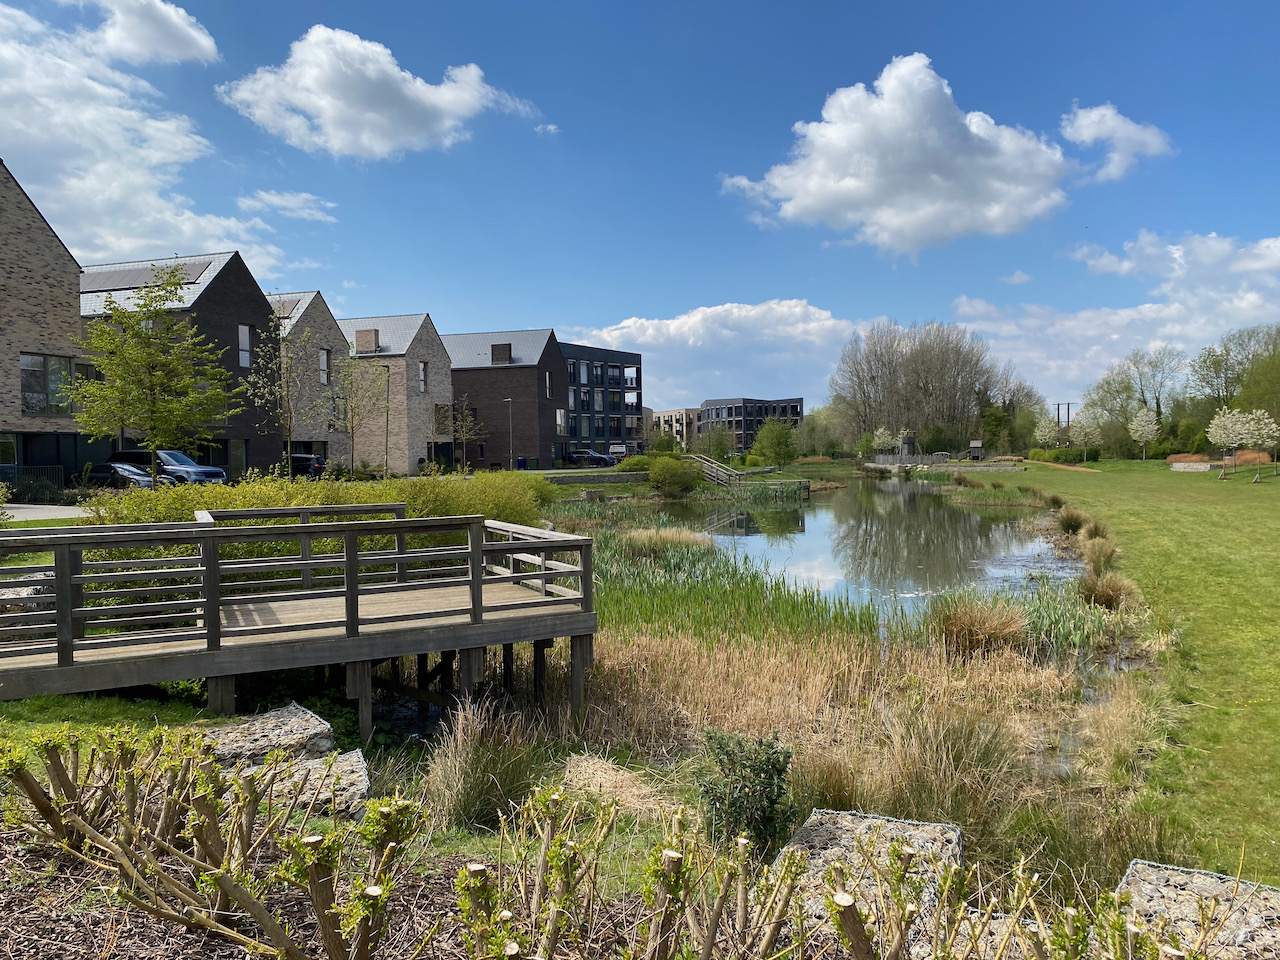 Pond and new housing at Barton Park. Image: Helen Pineo 2021.